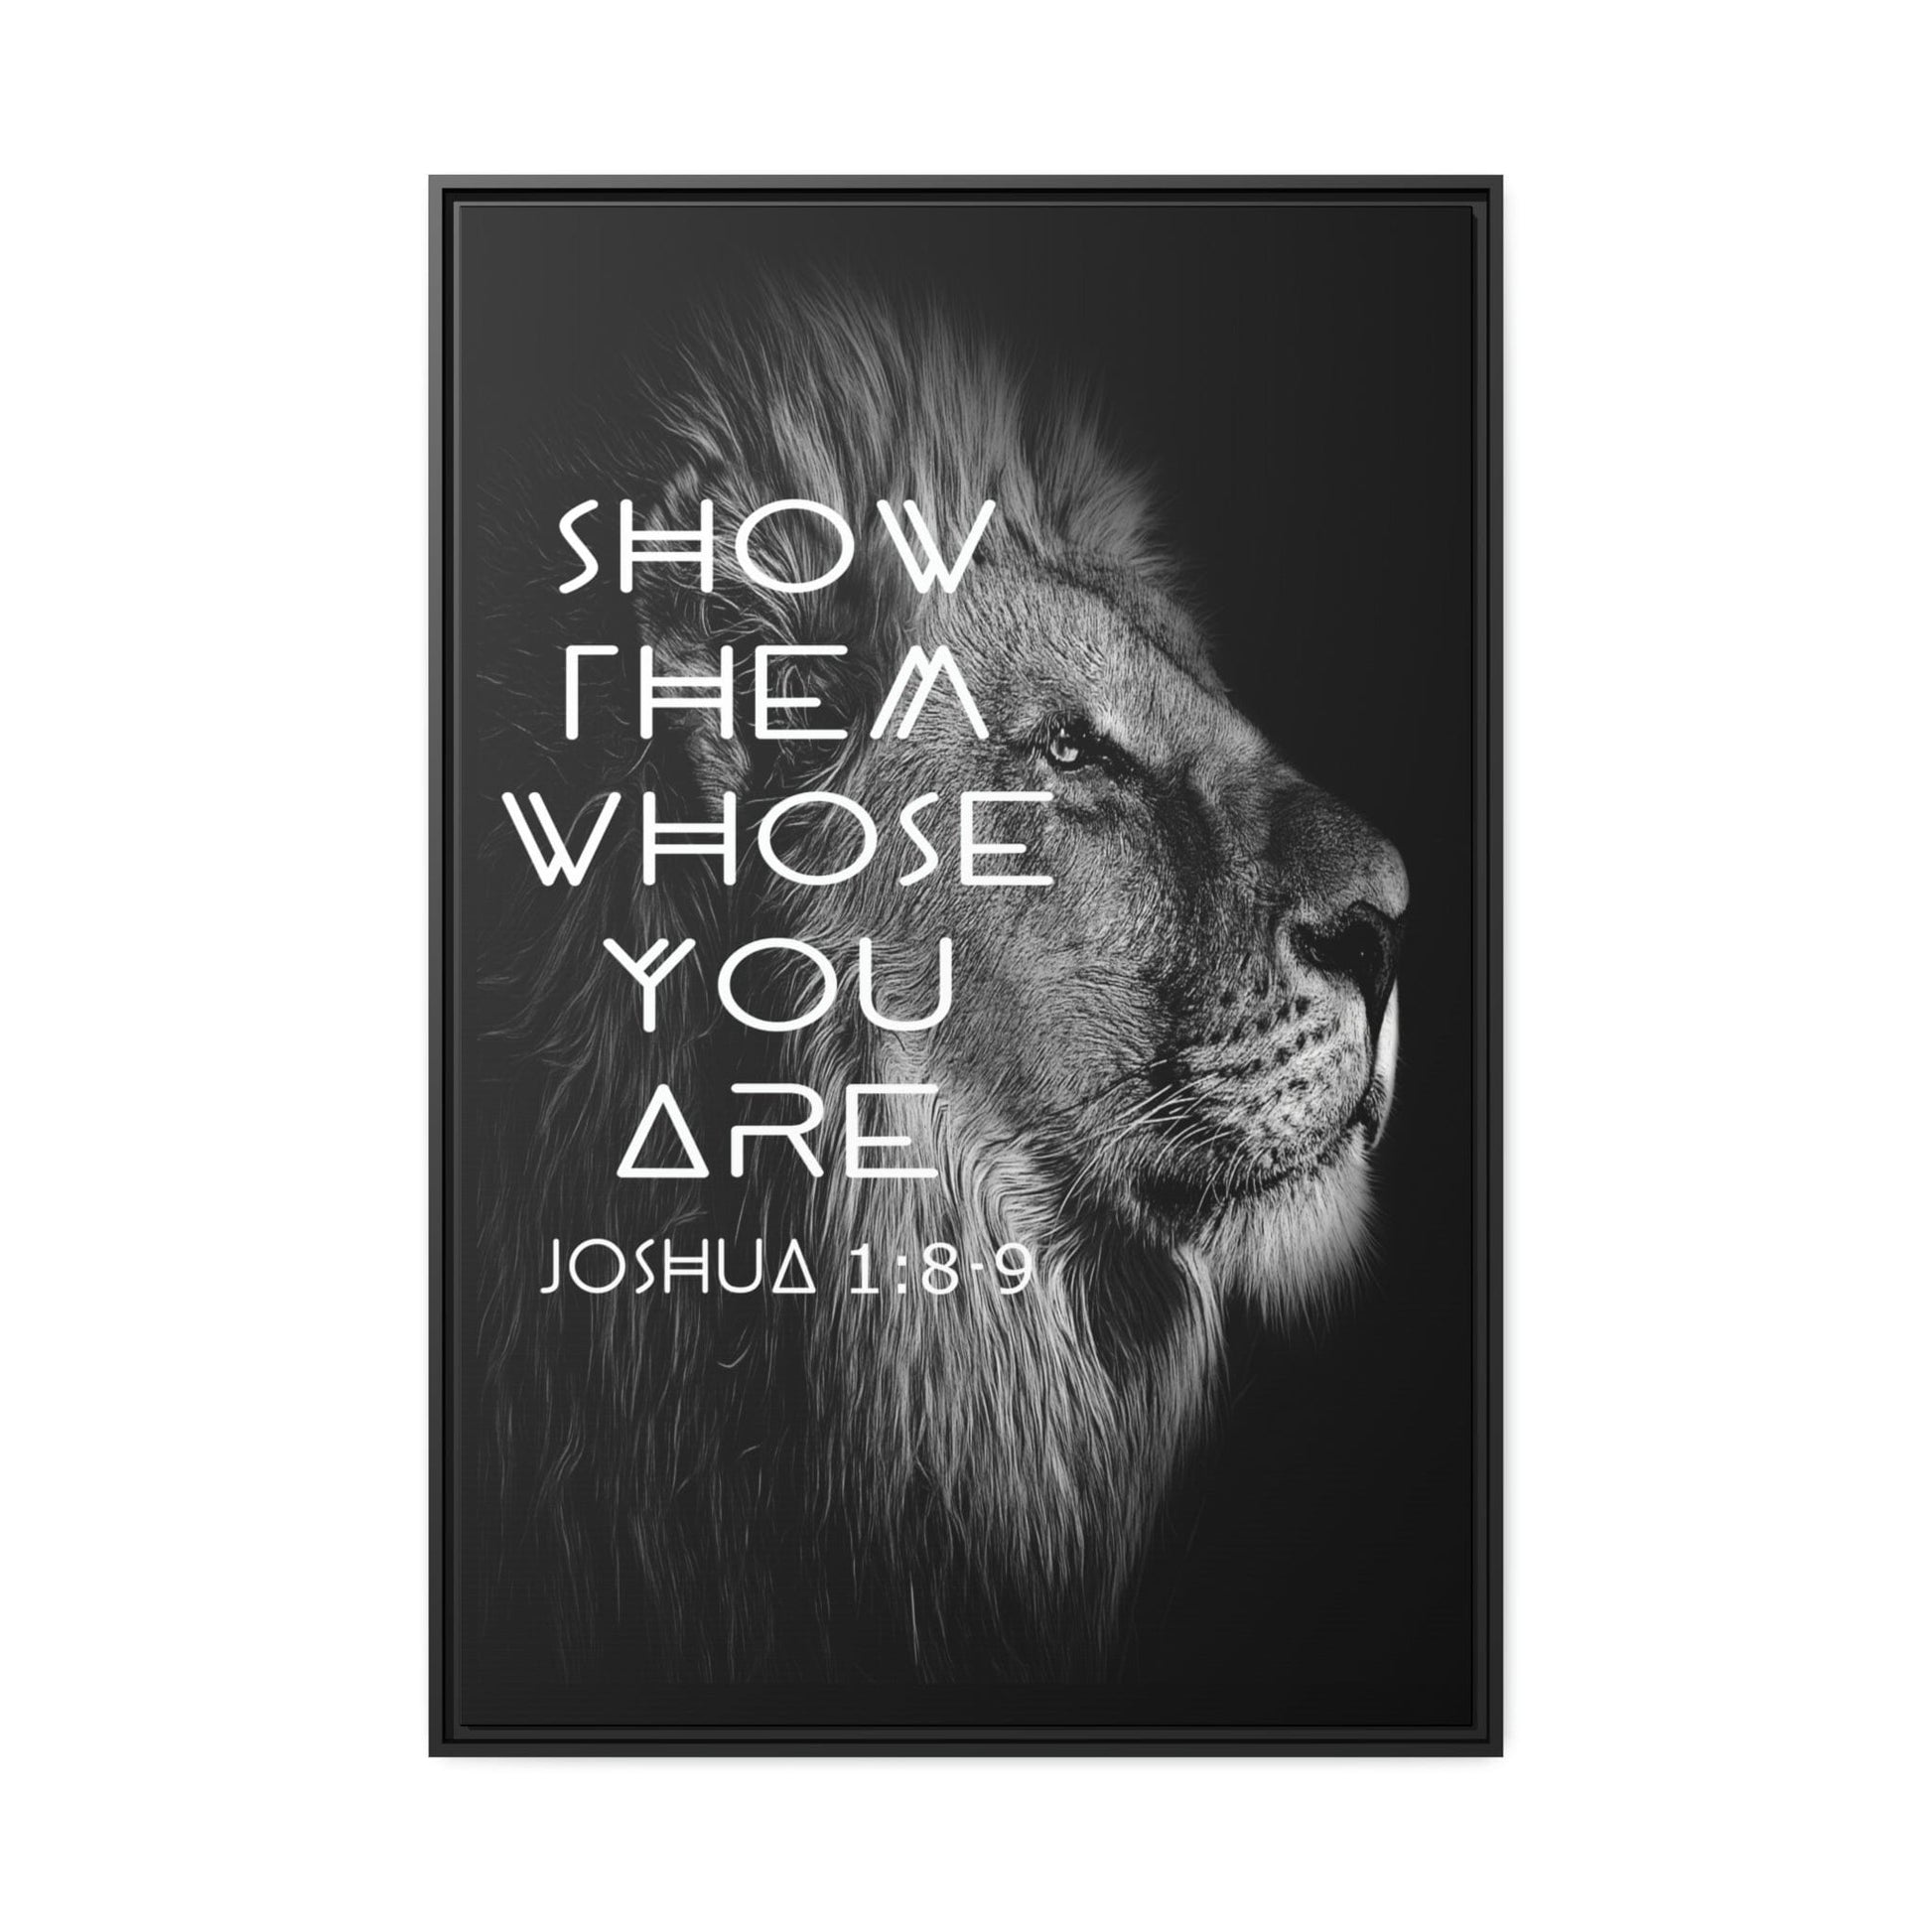 Printify Canvas 32″ x 48″ (Vertical) / Black / 1.25" Show Them Whose You Are - Joshua 1:8-9 Christian Canvas Wall Art